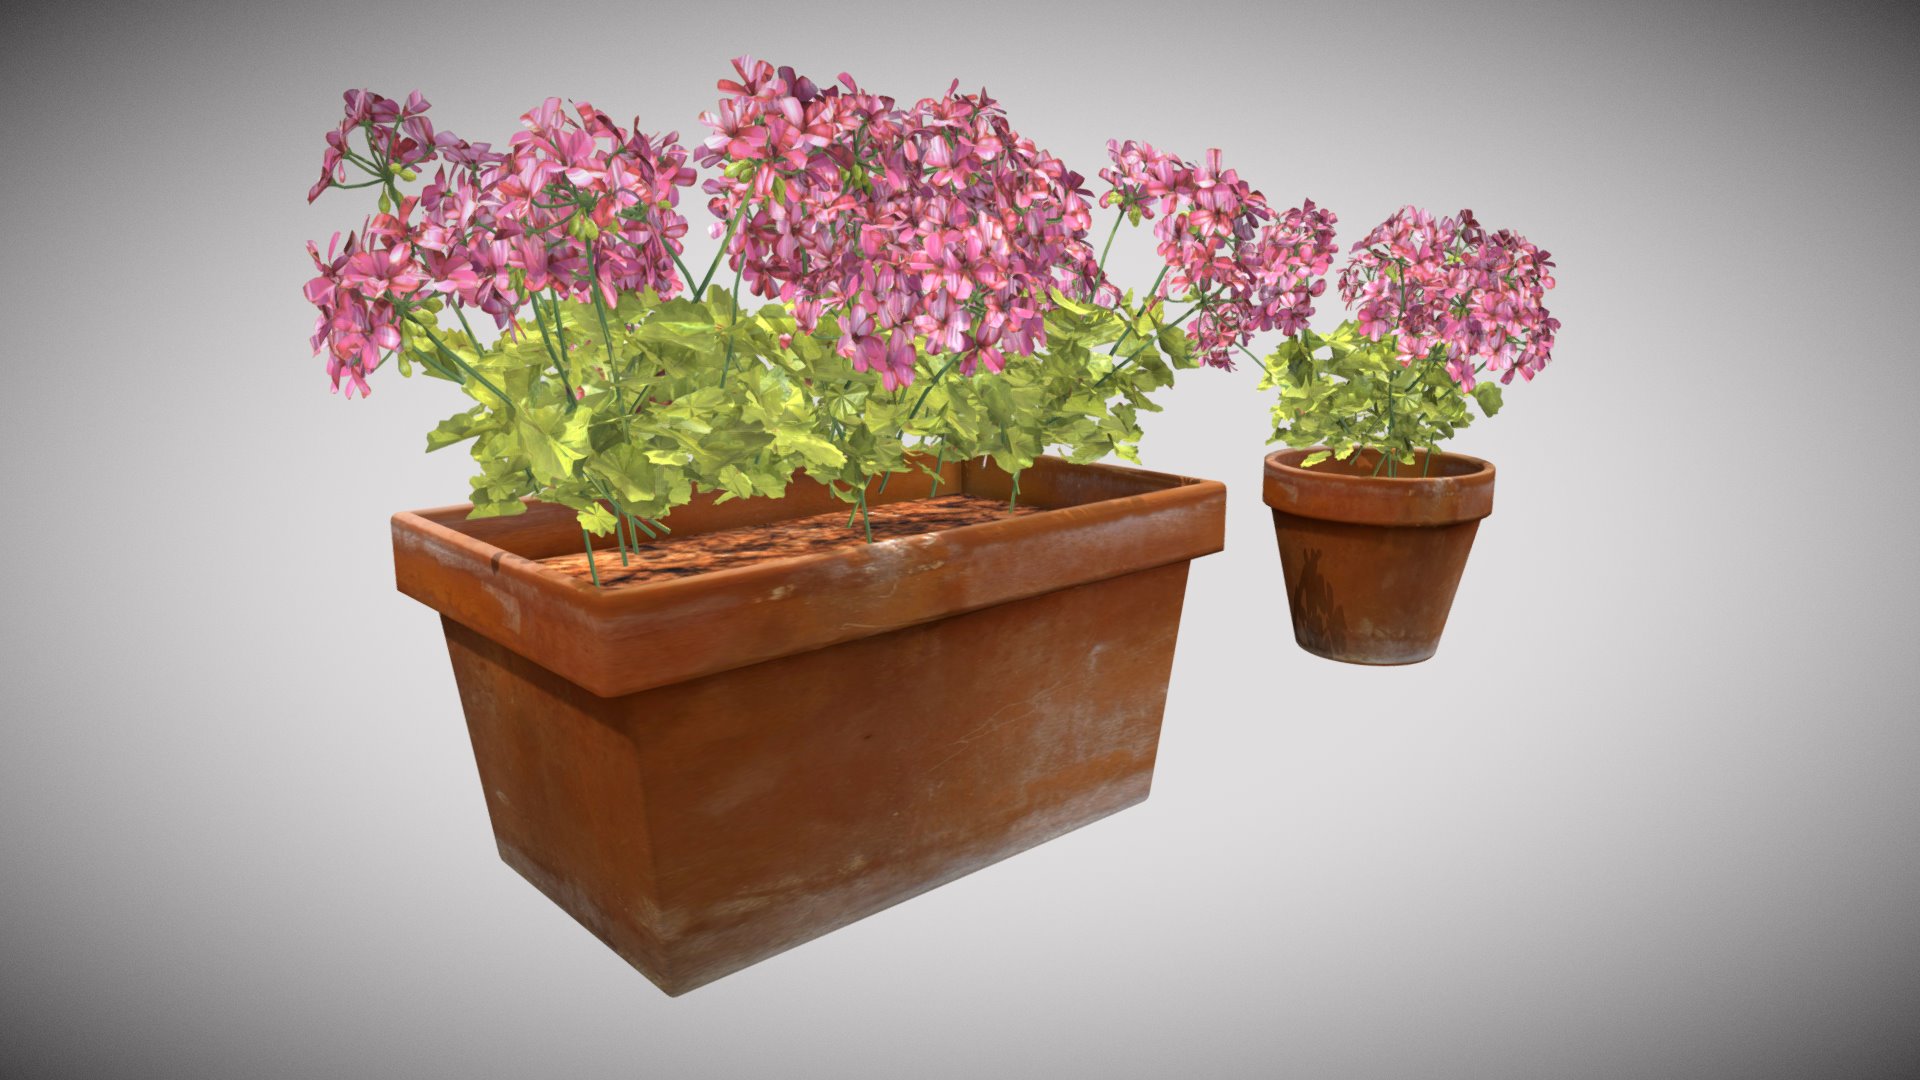 3D model Geranius - This is a 3D model of the Geranius. The 3D model is about a potted plant with pink flowers.